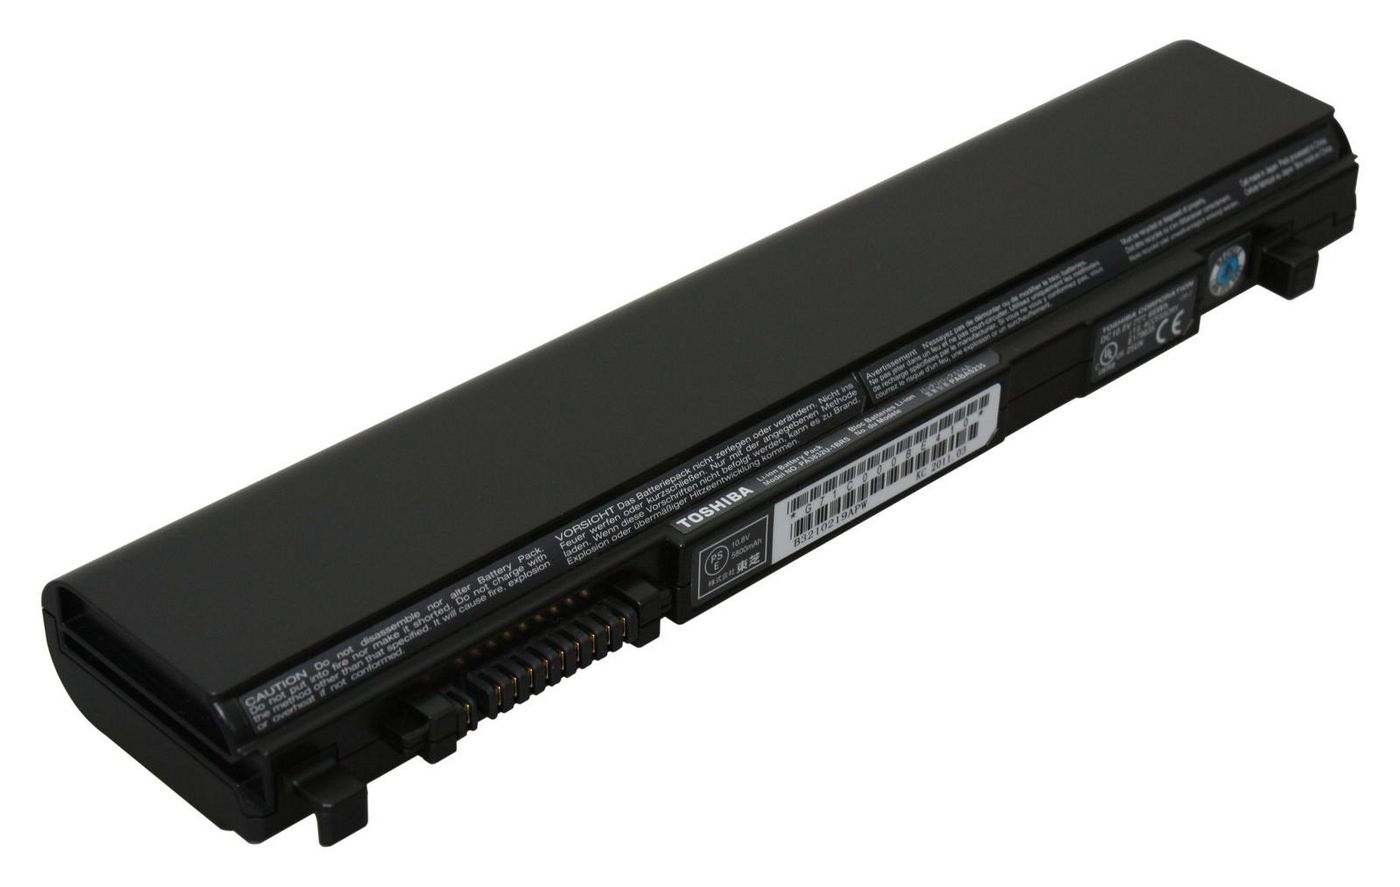 Toshiba P000702990 Battery Pack 6 Cell 